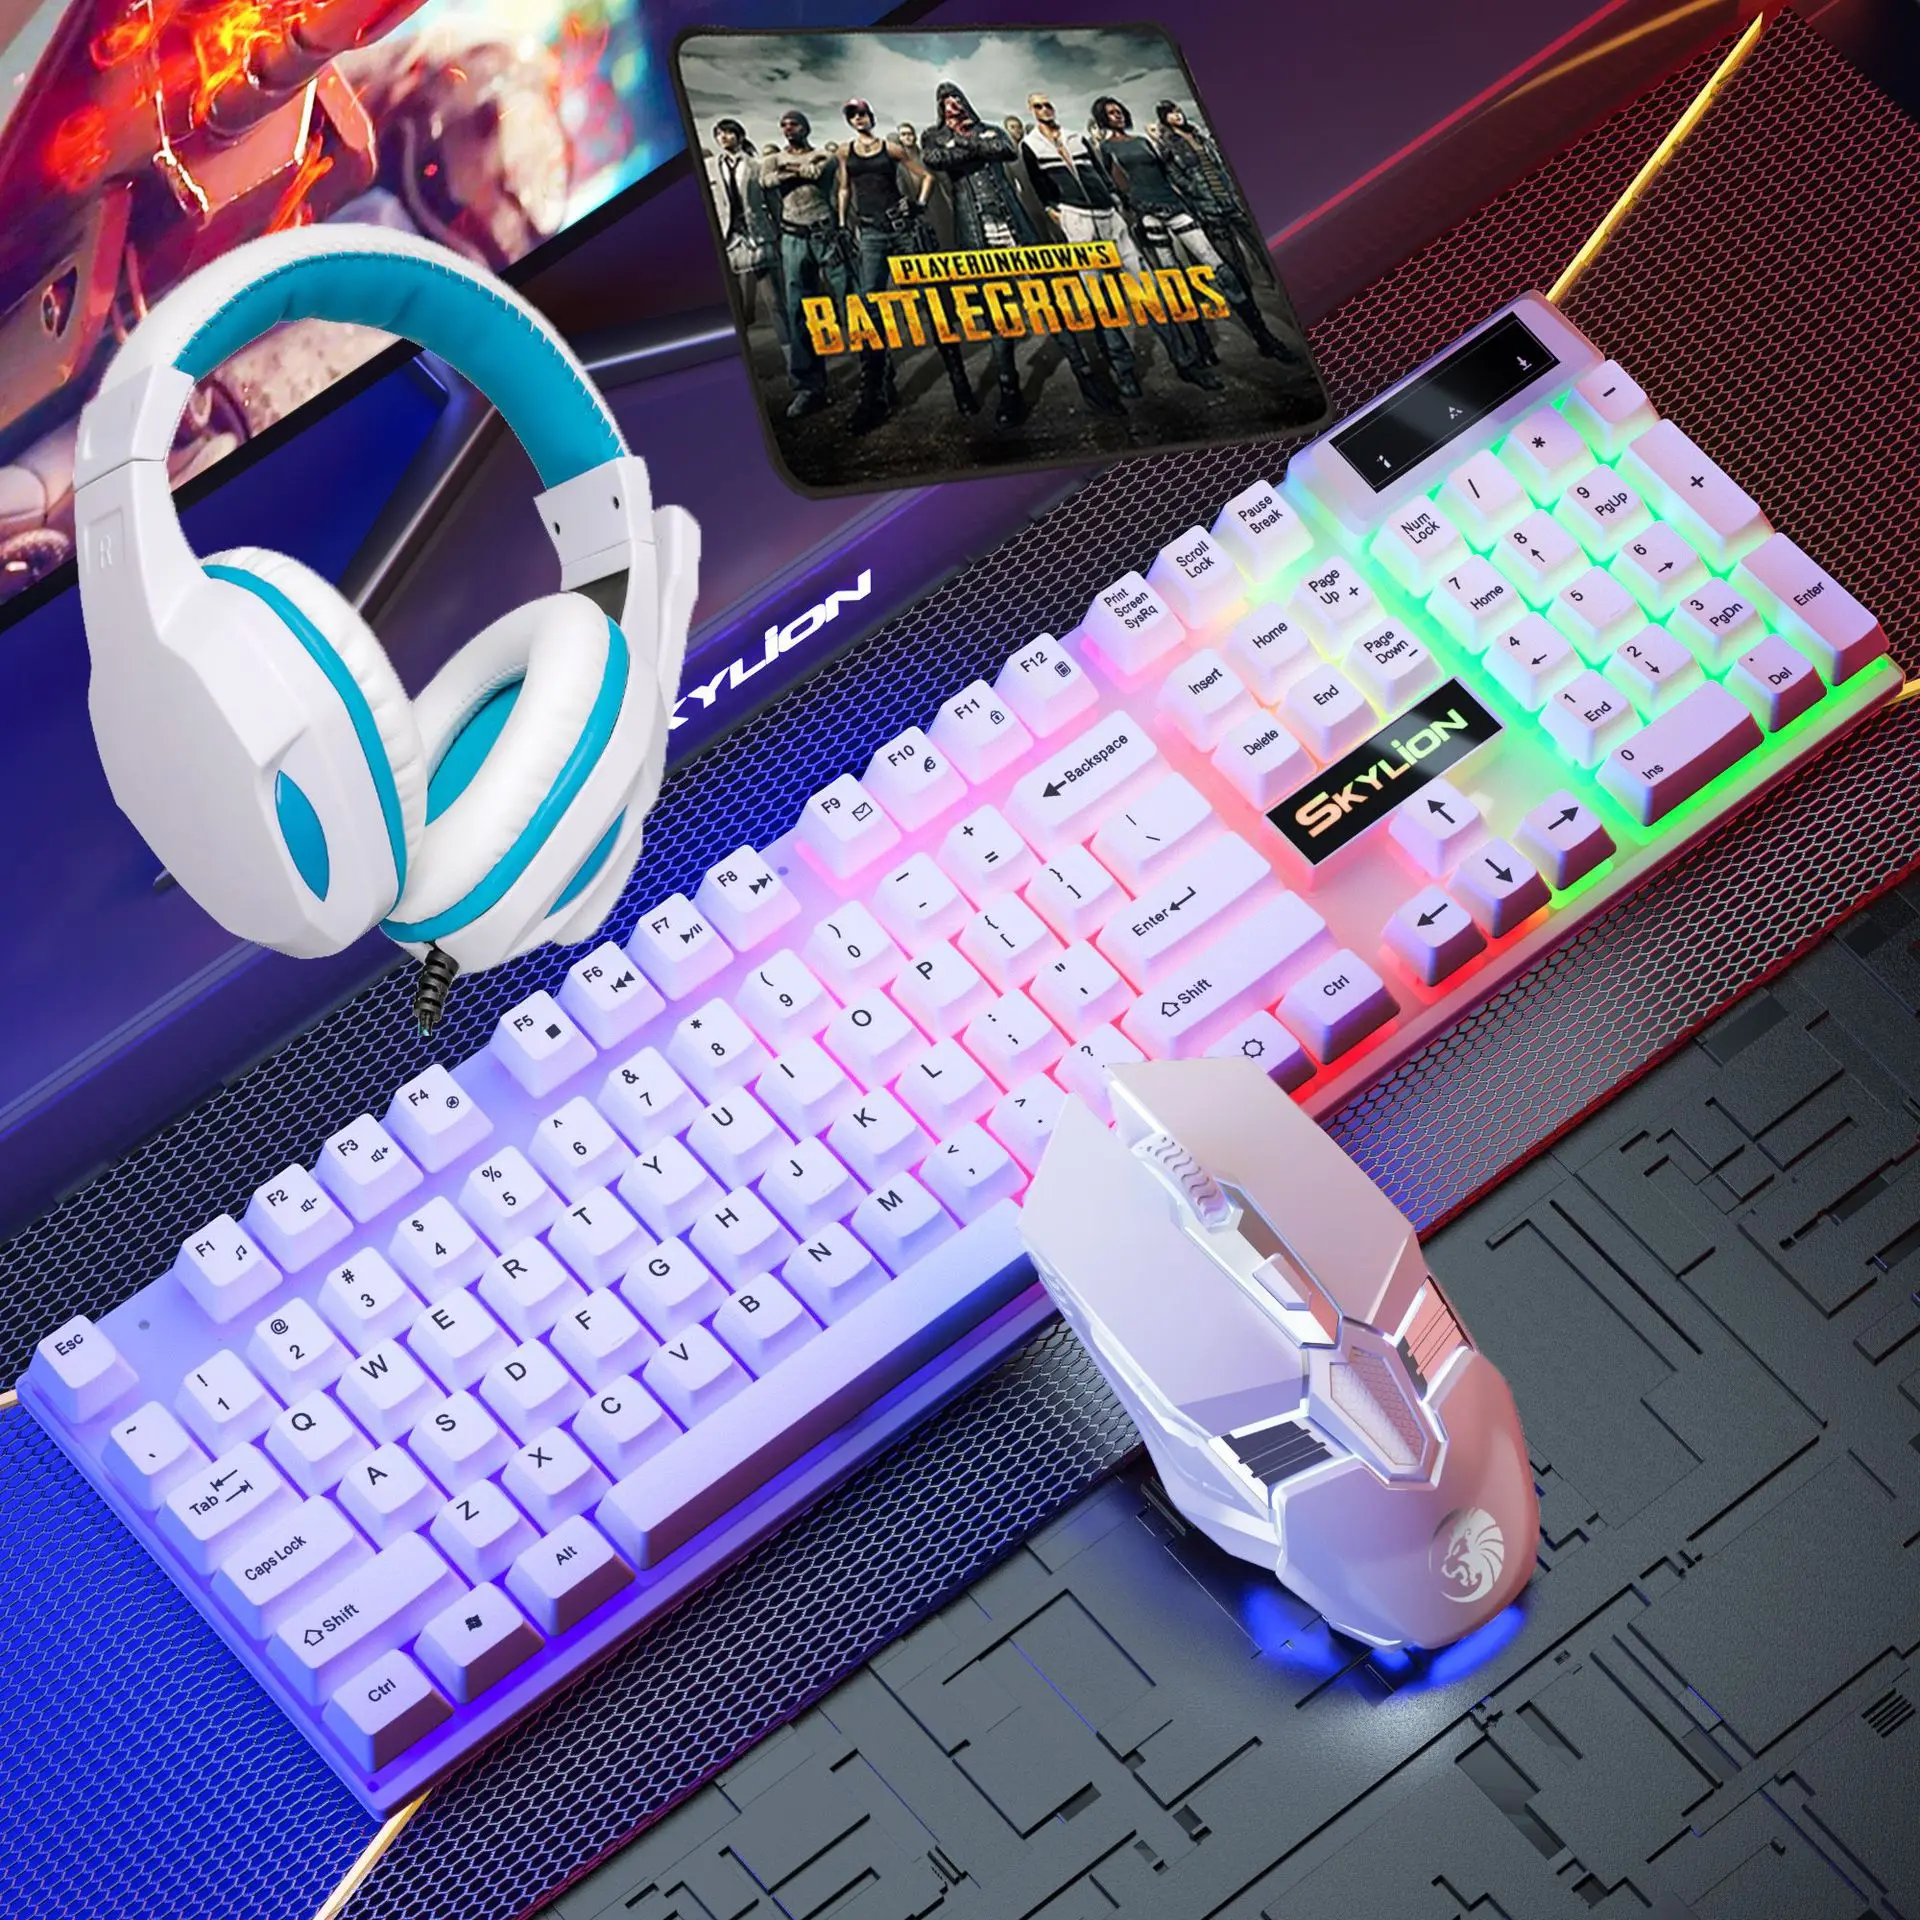 

4 in 1 Gaming Keyboard Wired Mouse Headphone Mouse Pad Kit RGB Backlight Keyboard Gamer Ergonomic Mause Mousepad Headset Combos